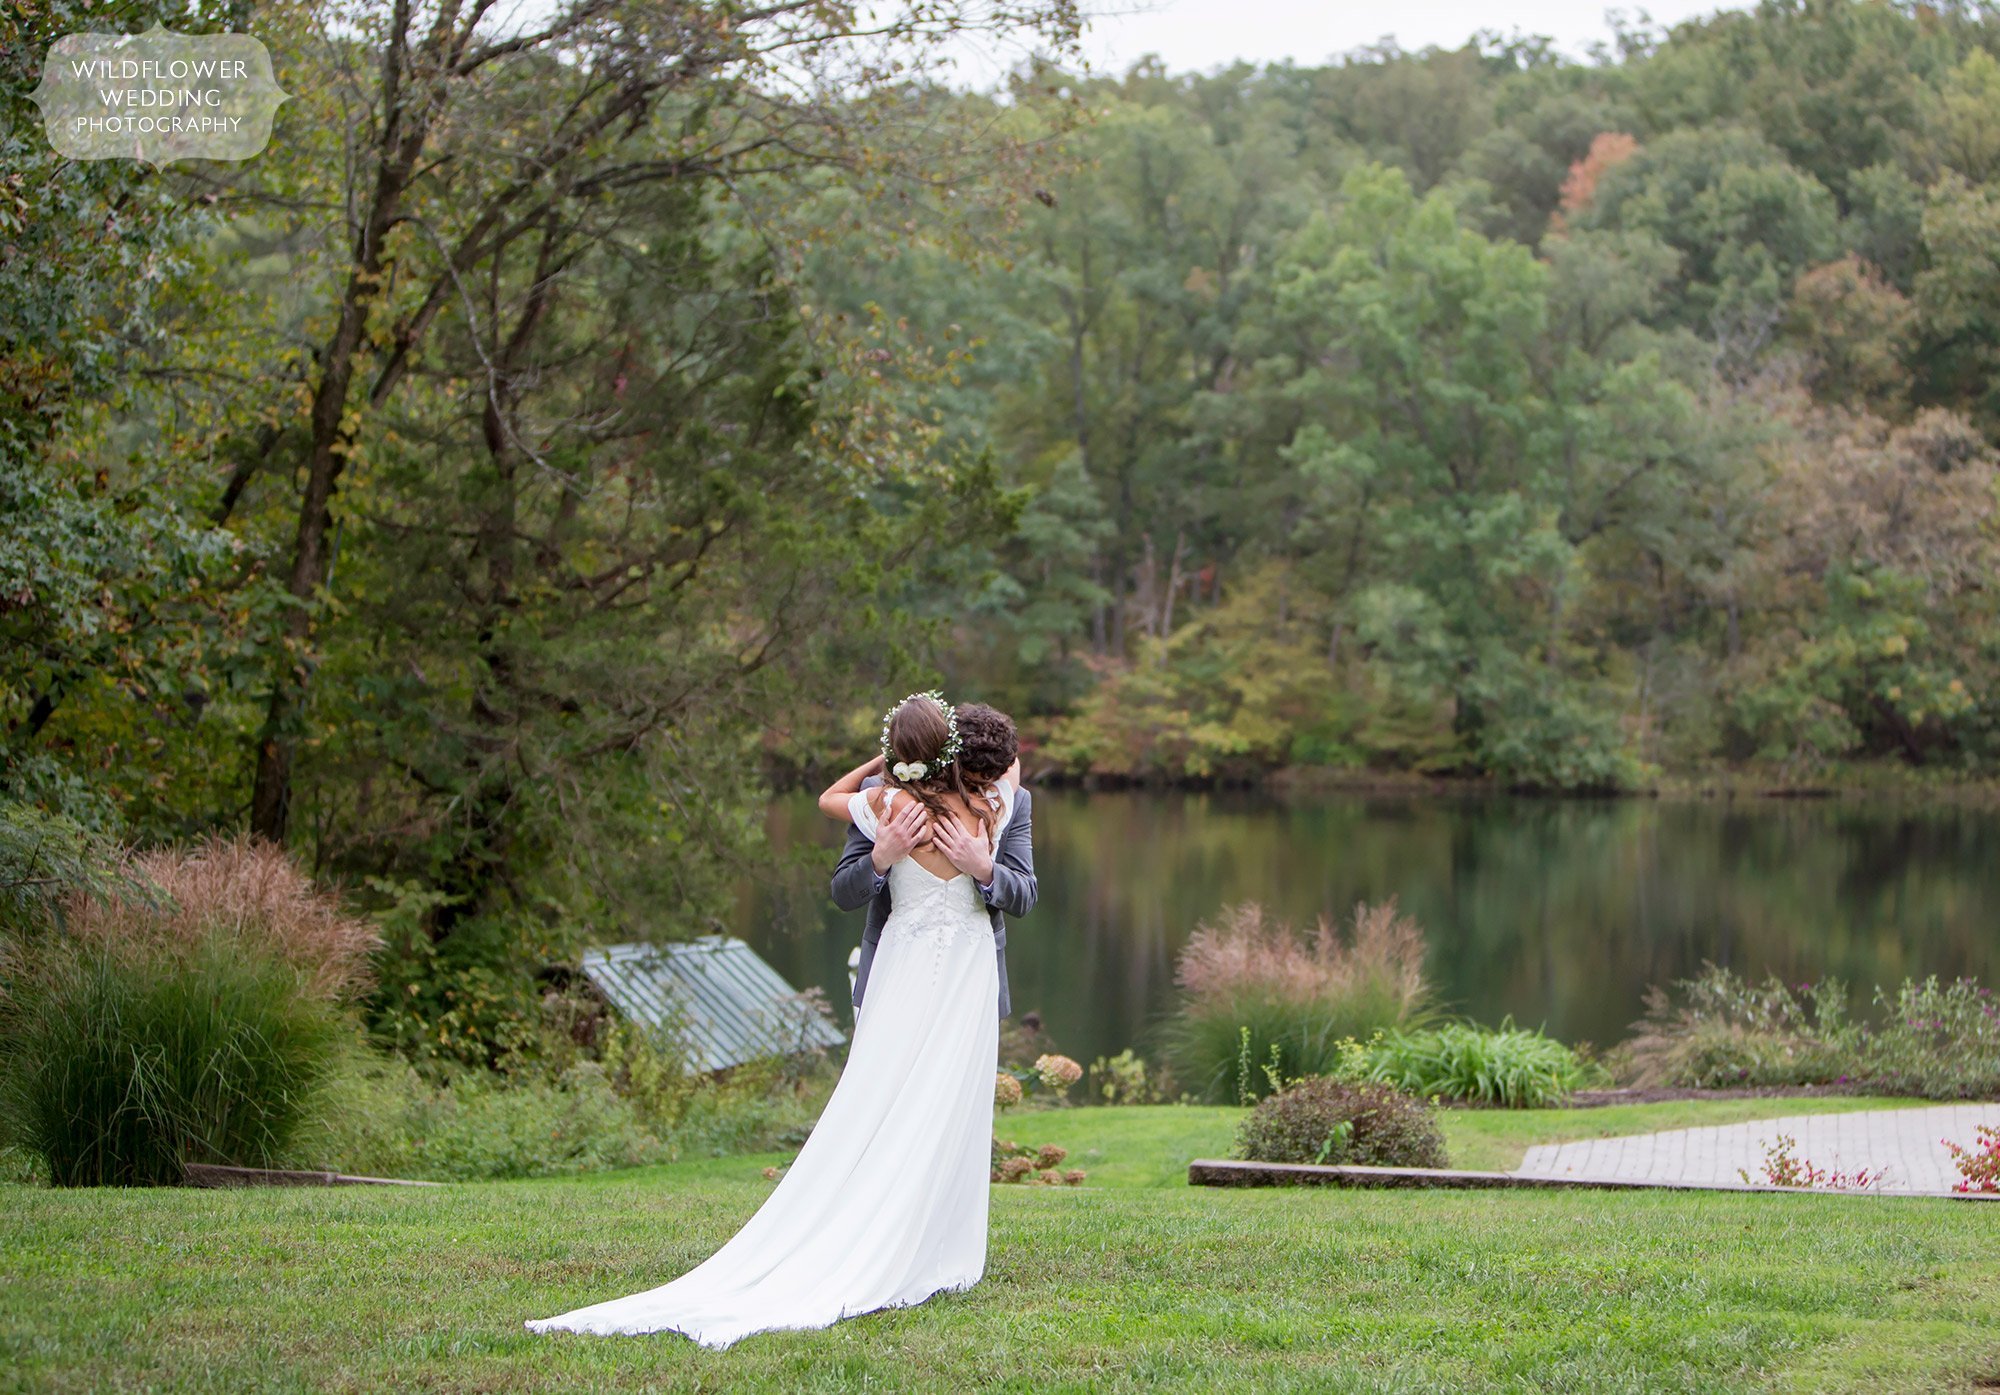 The bride and groom hug by the lake at the Little Piney Lodge wedding venue.